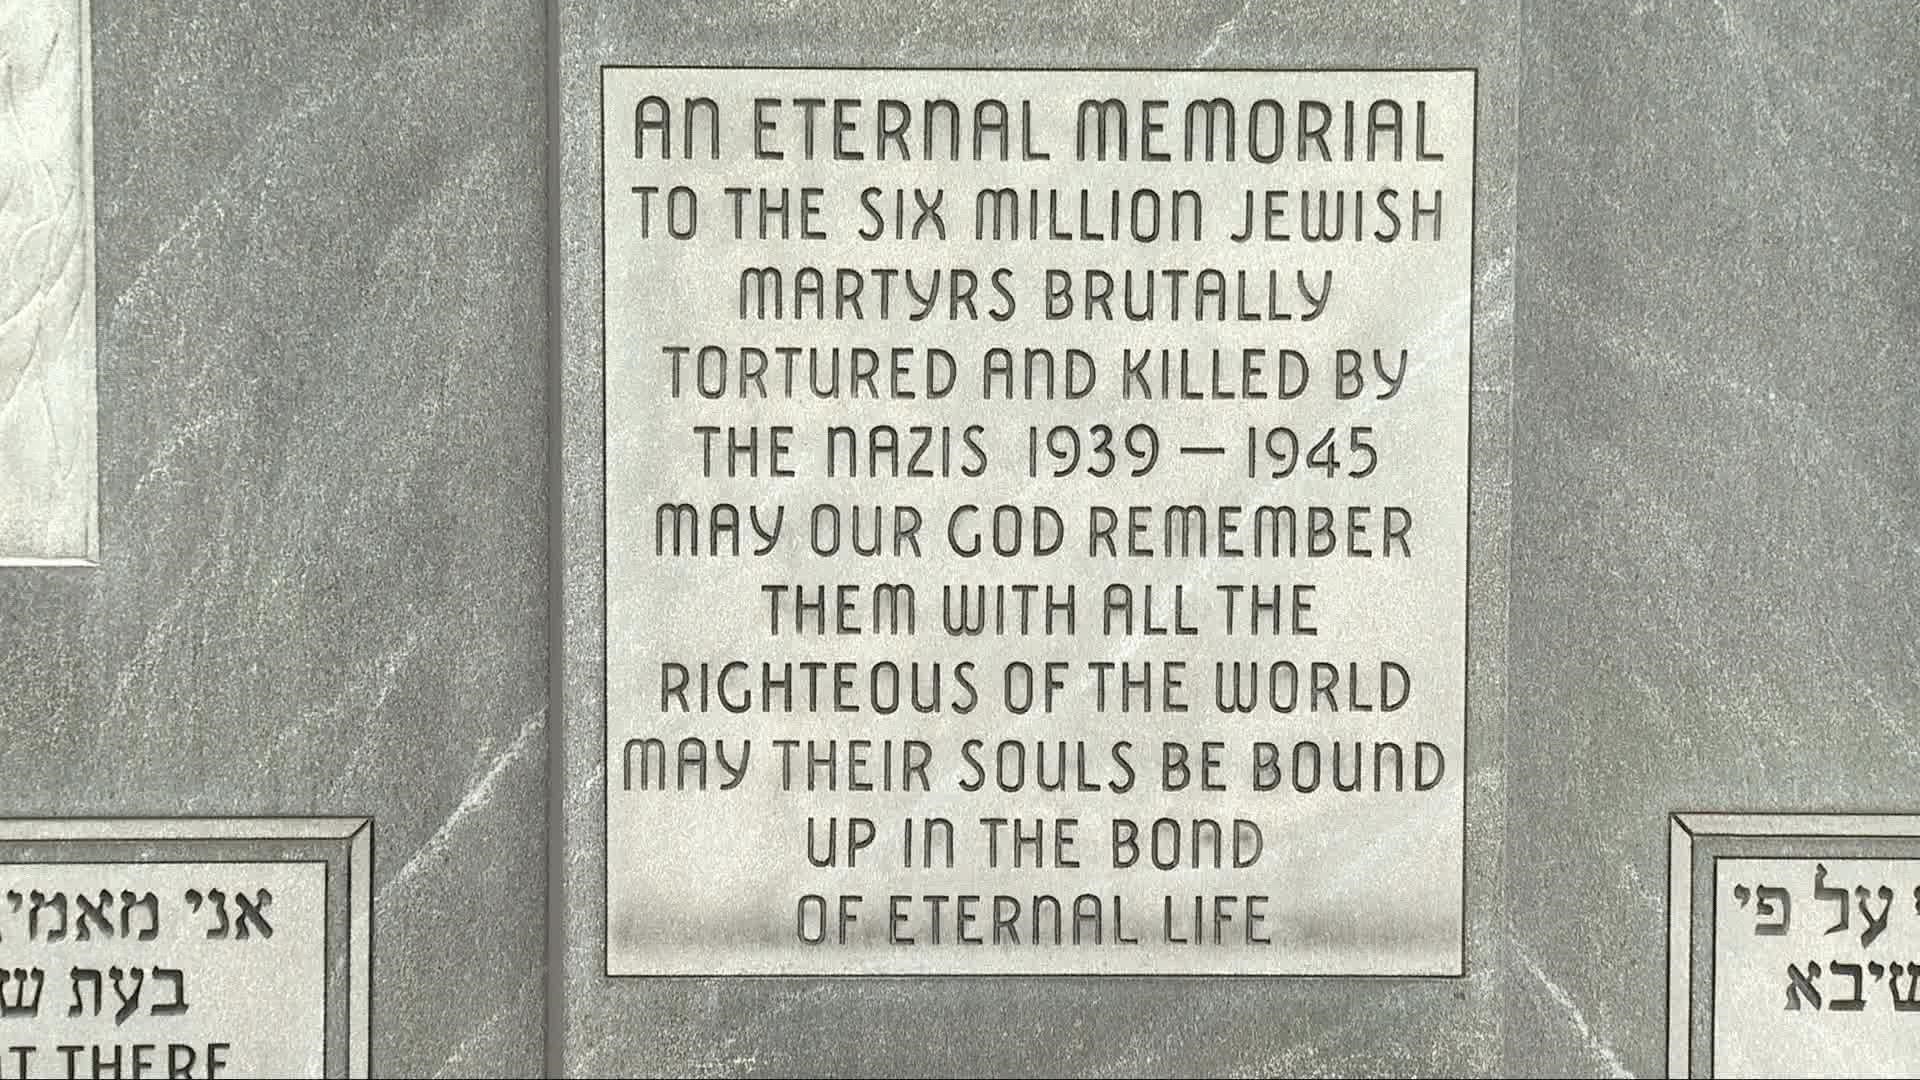 The Kol Israel Holocaust Memorial in Bedford Heights is the first Holocaust memorial in the United States to be given national memorial status.